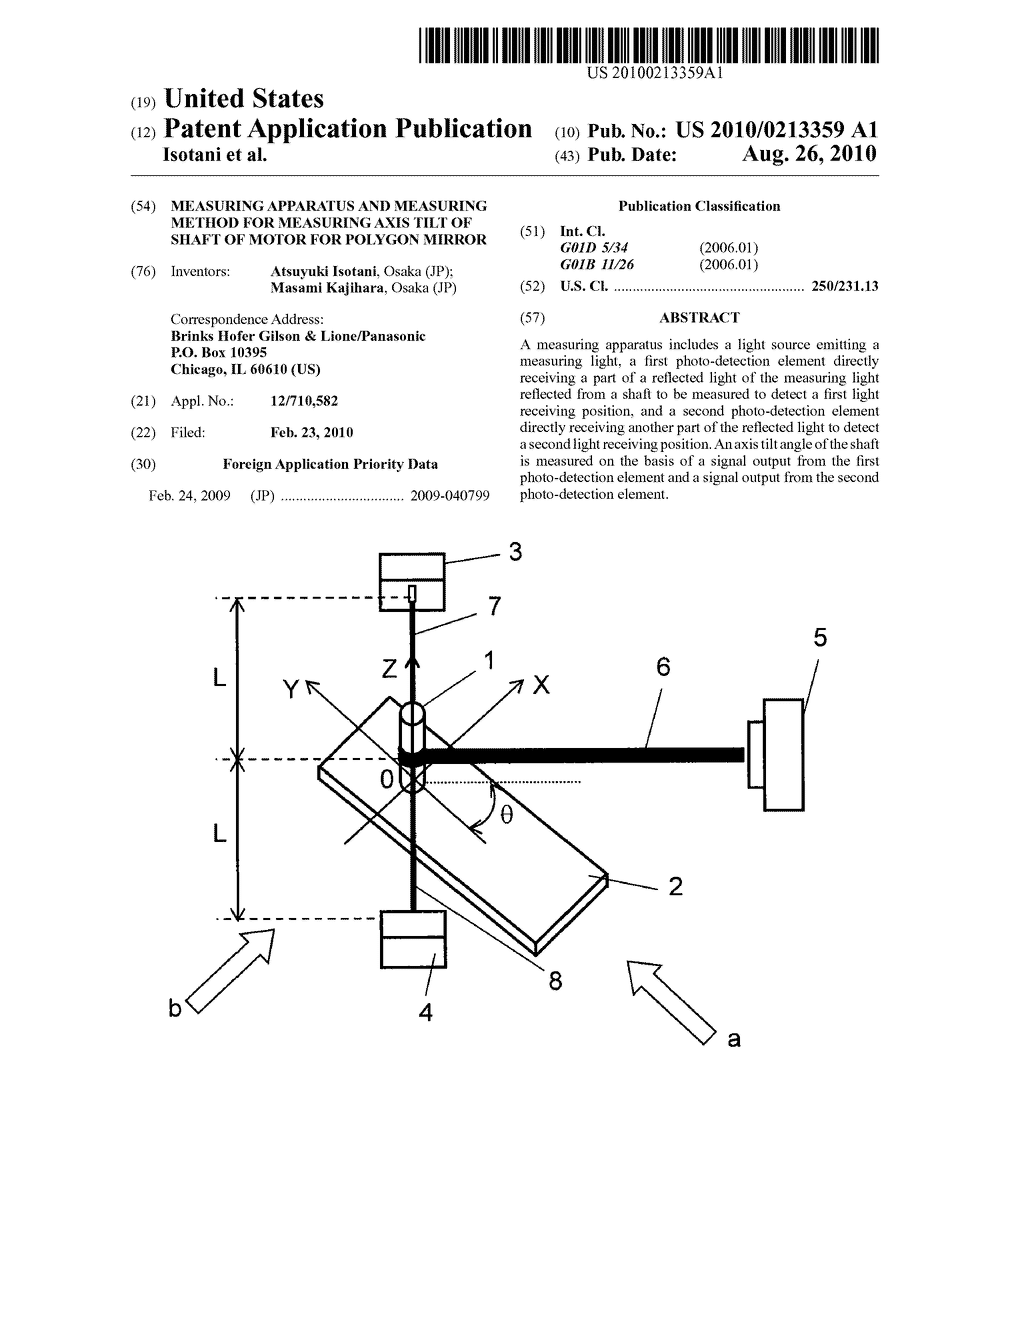 MEASURING APPARATUS AND MEASURING METHOD FOR MEASURING AXIS TILT OF SHAFT OF MOTOR FOR POLYGON MIRROR - diagram, schematic, and image 01